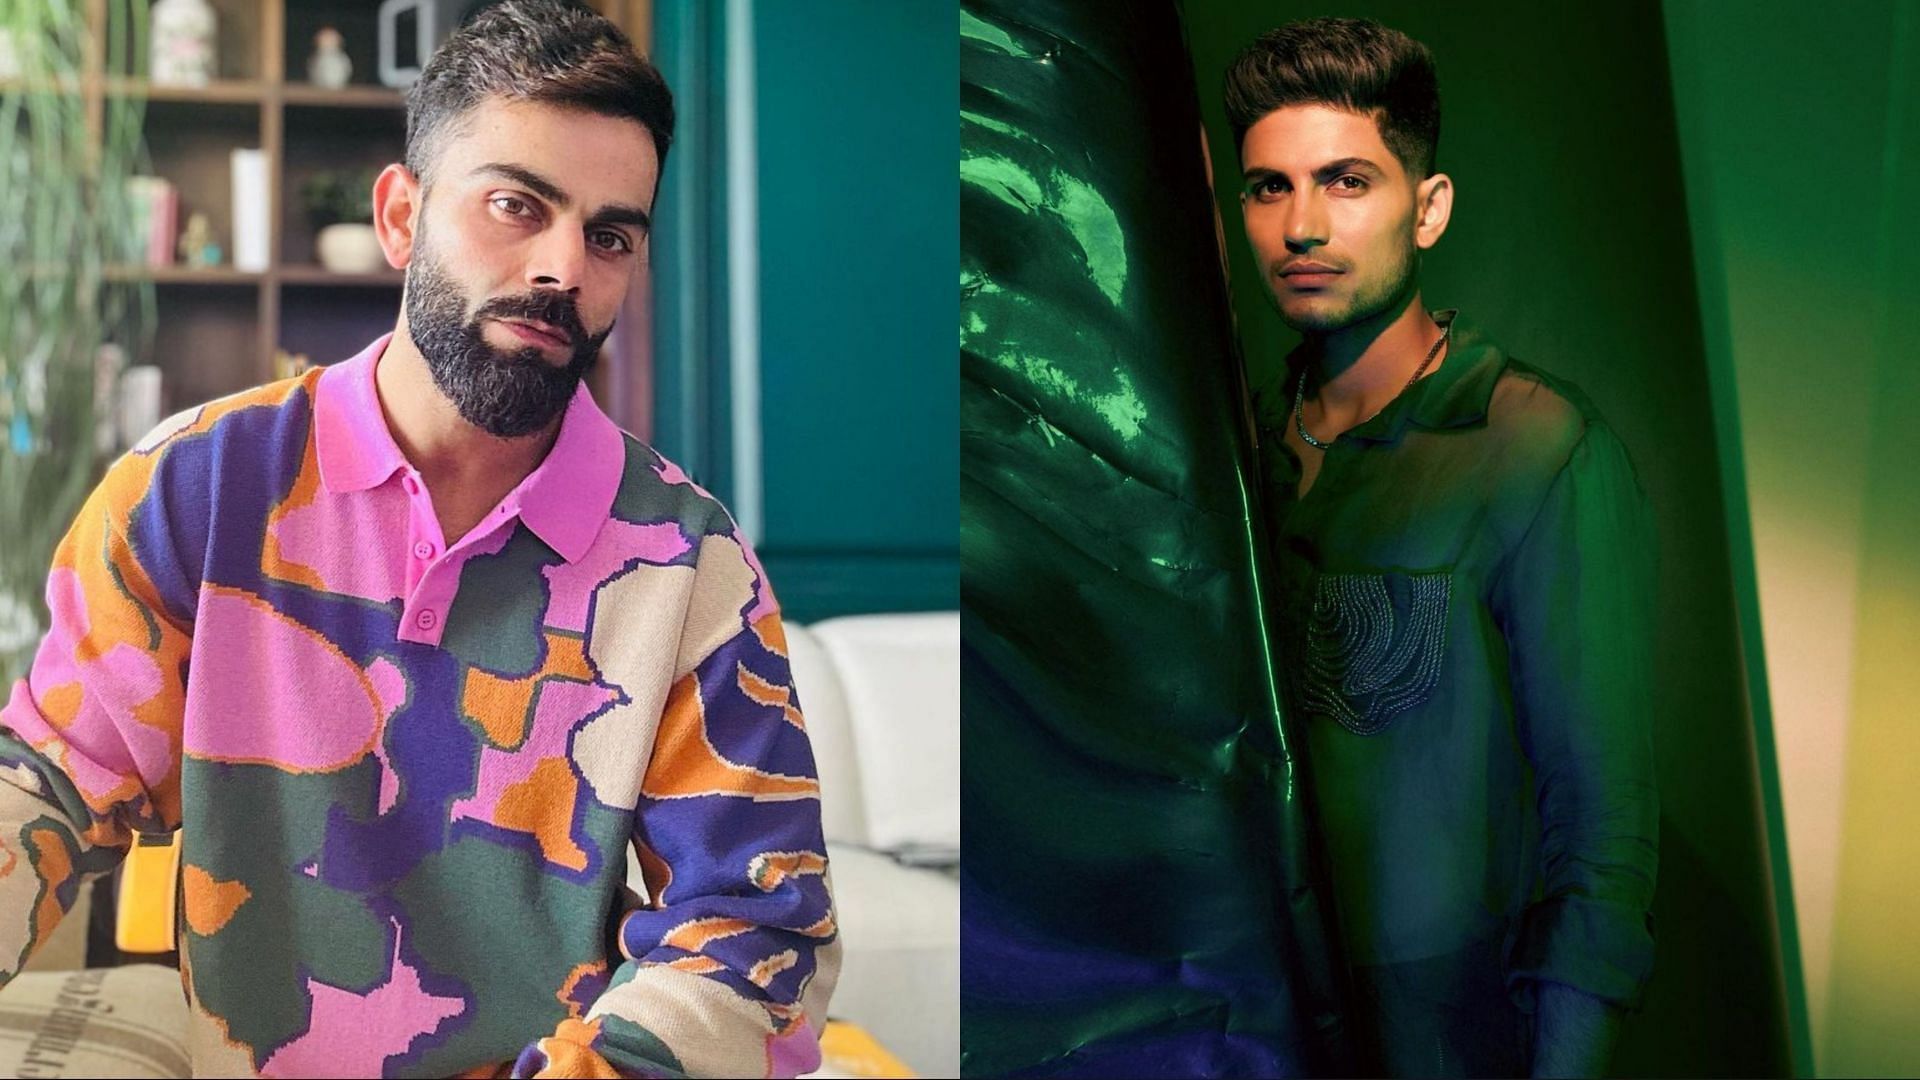 Virat Kohli and Shubman Gill are two of the most popular Indian cricketers (Image: Instagram)